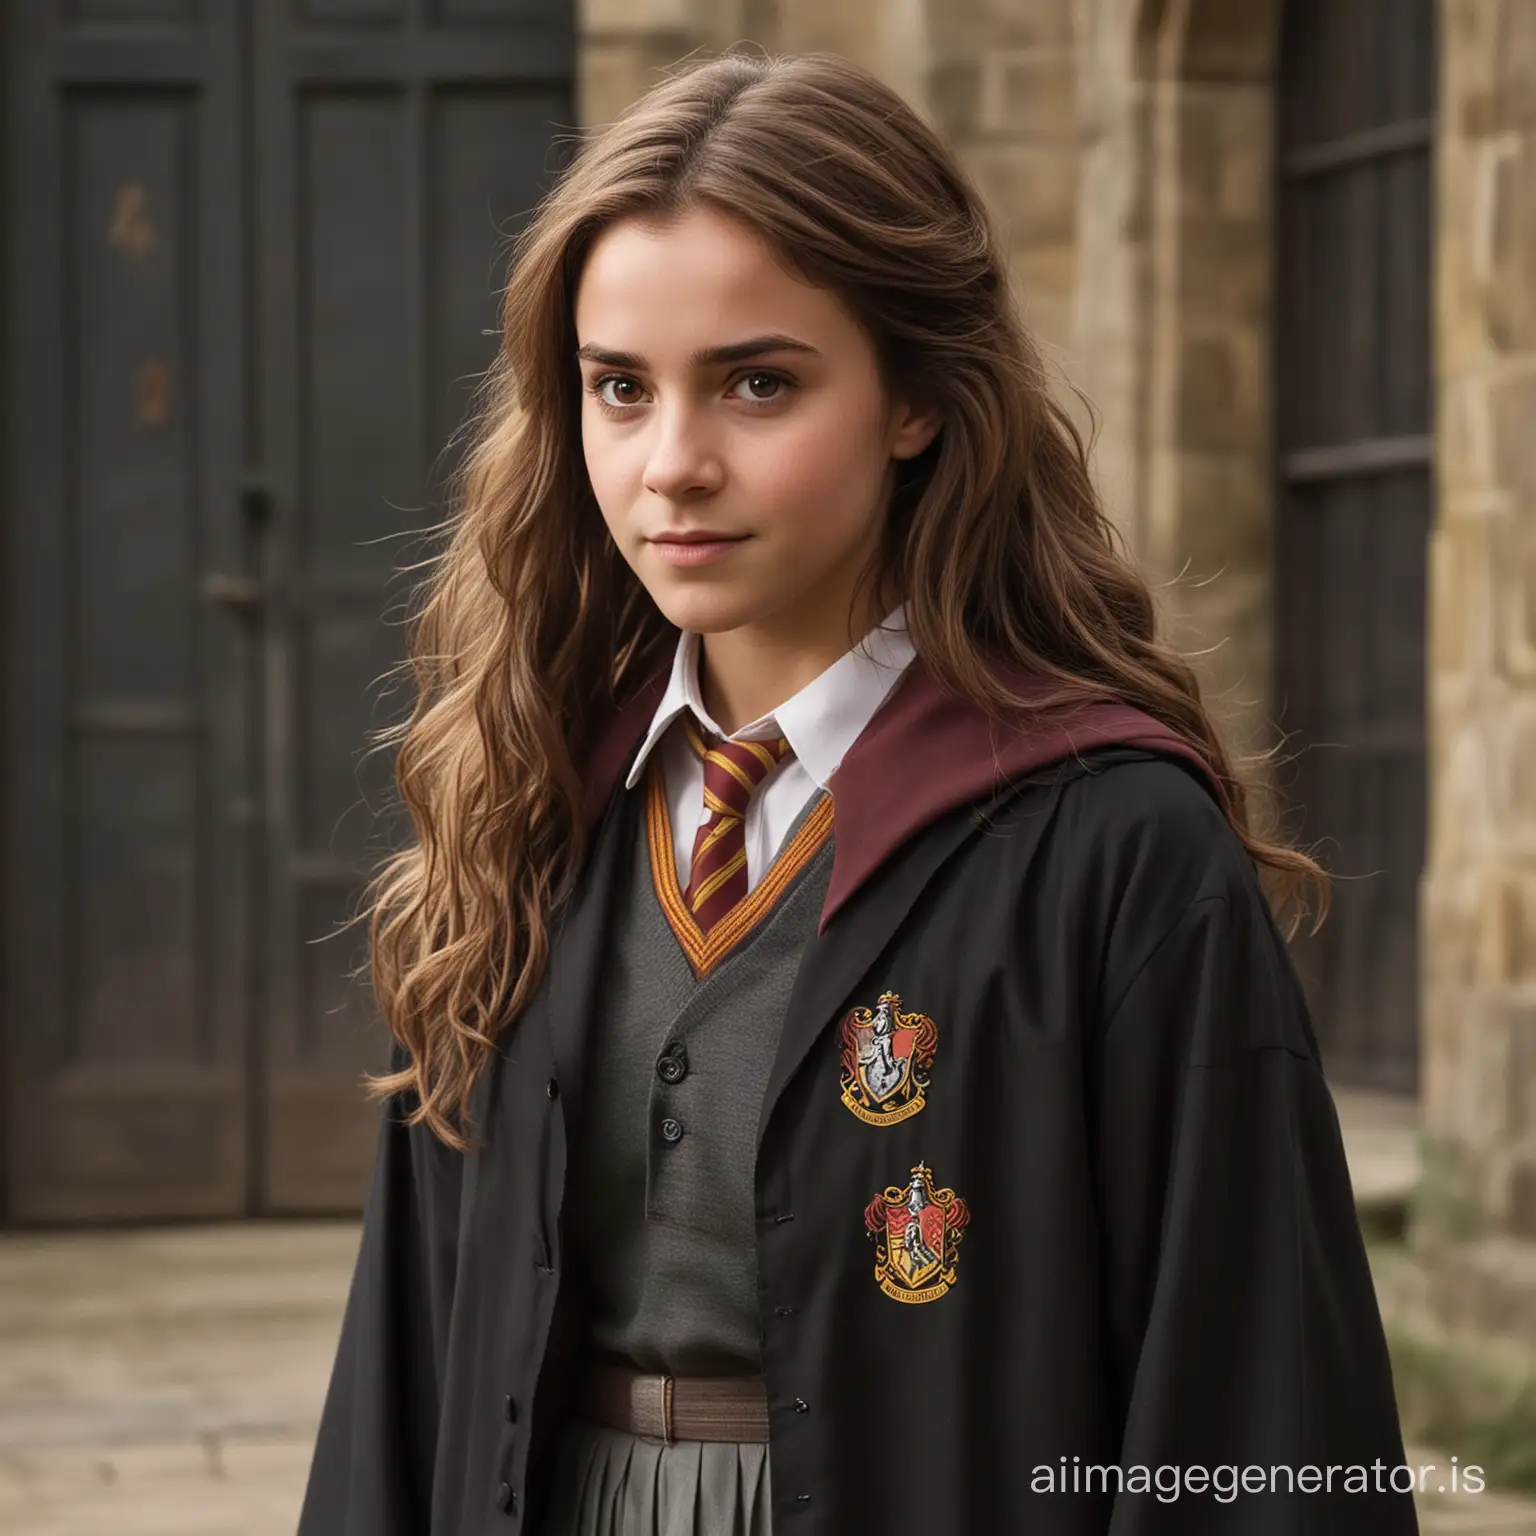 Hermione Granger, one of Harry Potter's closest friends, is depicted as a young witch with bushy brown hair, usually tied back in a practical manner. Her face is framed by a pair of large, intelligent brown eyes that often convey her sharp wit and quick intellect. Hermione's appearance is often described as neat and tidy, reflecting her meticulous nature and studious demeanor.

In terms of attire, Hermione is typically seen wearing the standard Hogwarts school uniform, consisting of a black robe with the school crest, a white collared shirt, a tie in her house colors (Gryffindor, in her case), and a pleated skirt. However, her clothing choices also reflect her practicality and no-nonsense approach to life. She often opts for comfortable and functional clothing, preferring simplicity over extravagance.

Beyond her appearance, Hermione is characterized by her brilliant mind, fierce loyalty, and unwavering determination. She is known for her dedication to her studies and her willingness to stand up for what she believes is right, even in the face of adversity. Hermione's character embodies the values of courage, intelligence, and compassion, making her a beloved and iconic figure in the world of Harry Potter.